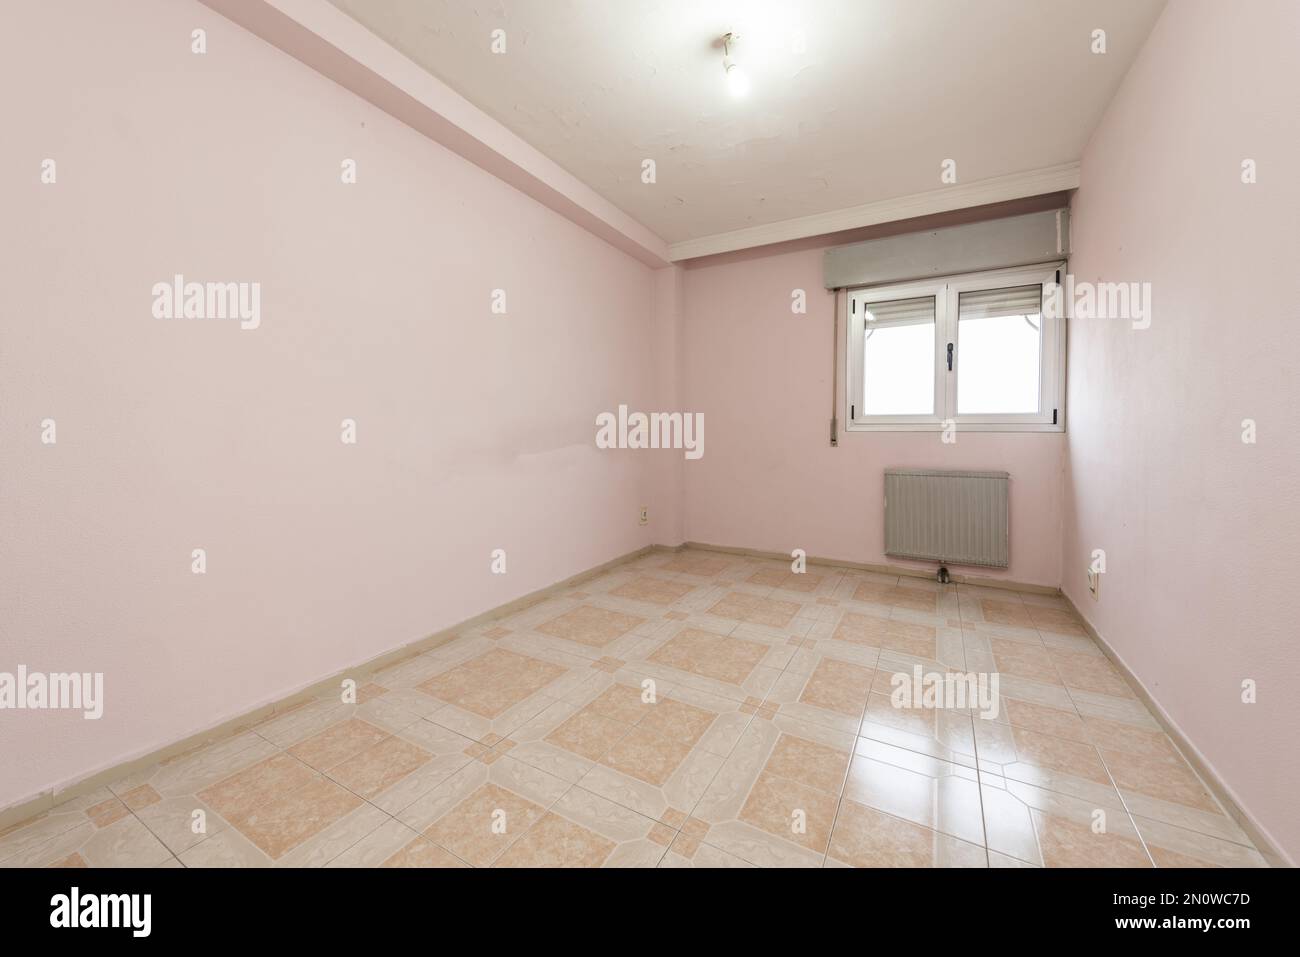 Totally empty room with pink painted walls and old stoneware floors in two color tones Stock Photo